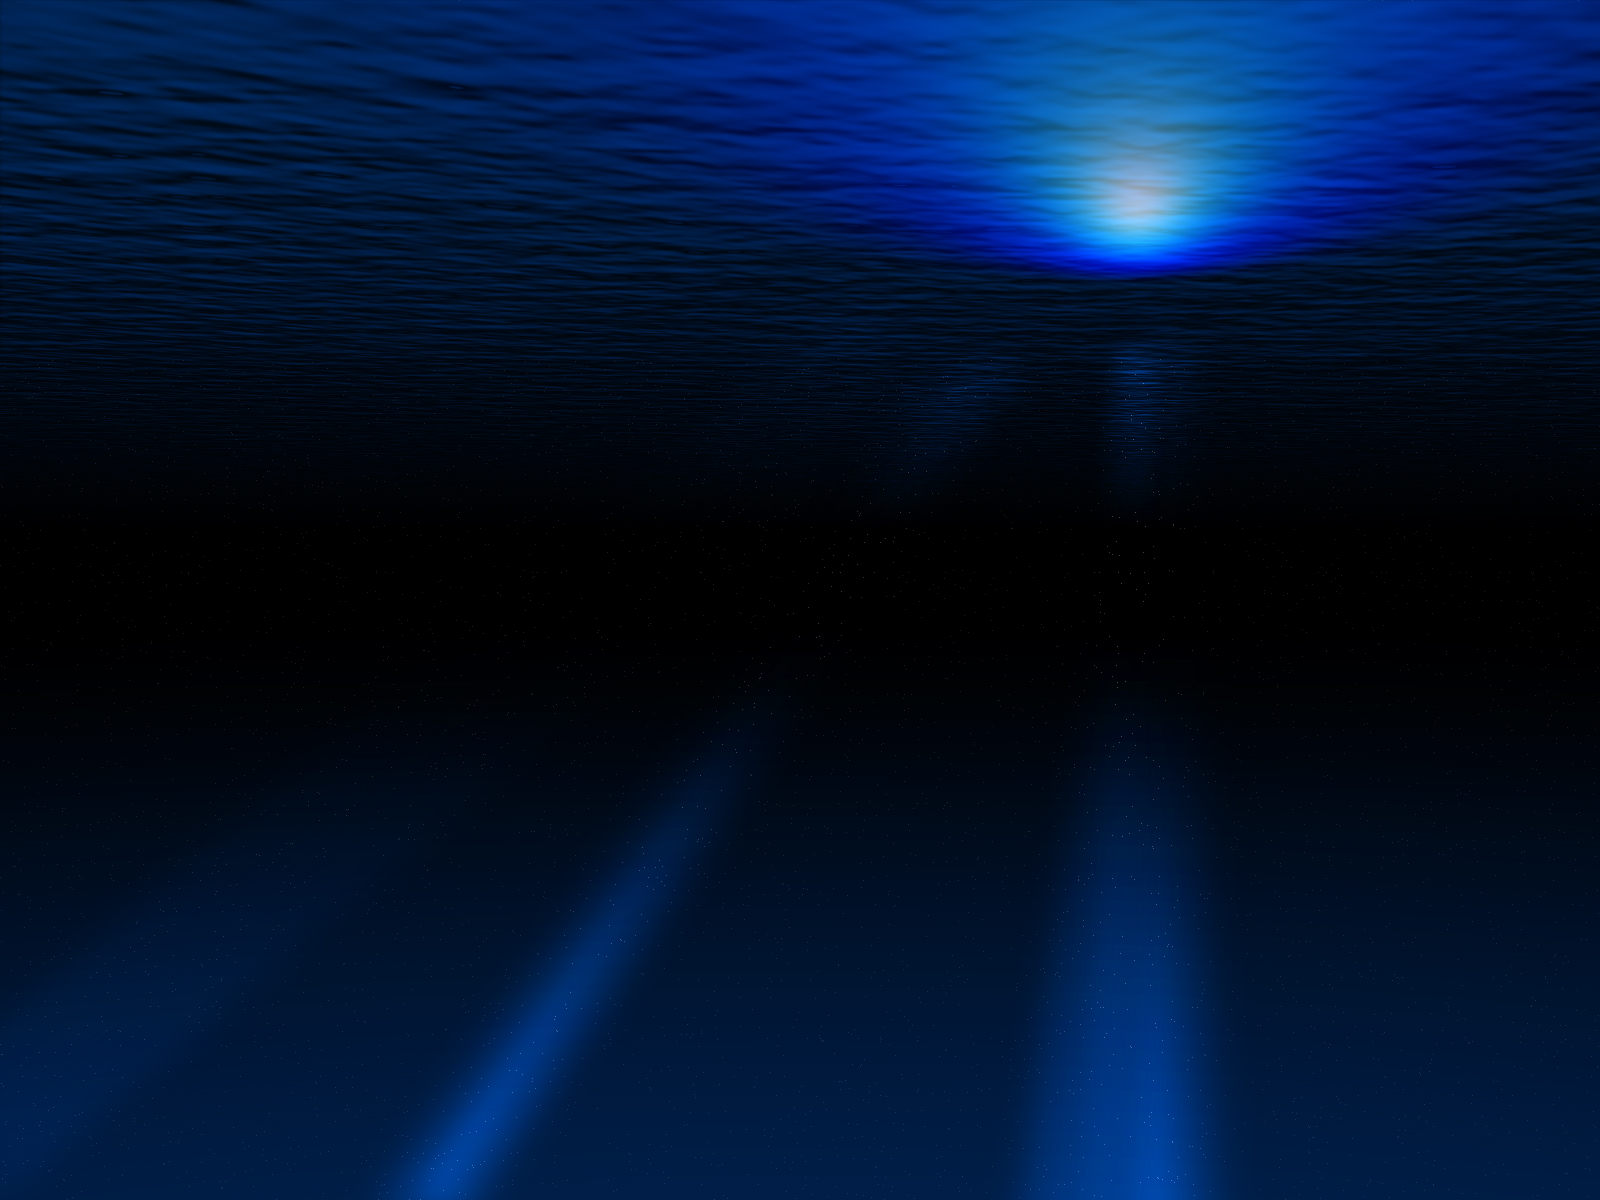 Free Download Wallpaper Abyss X Px Hdwallsourcecom X For Your Desktop